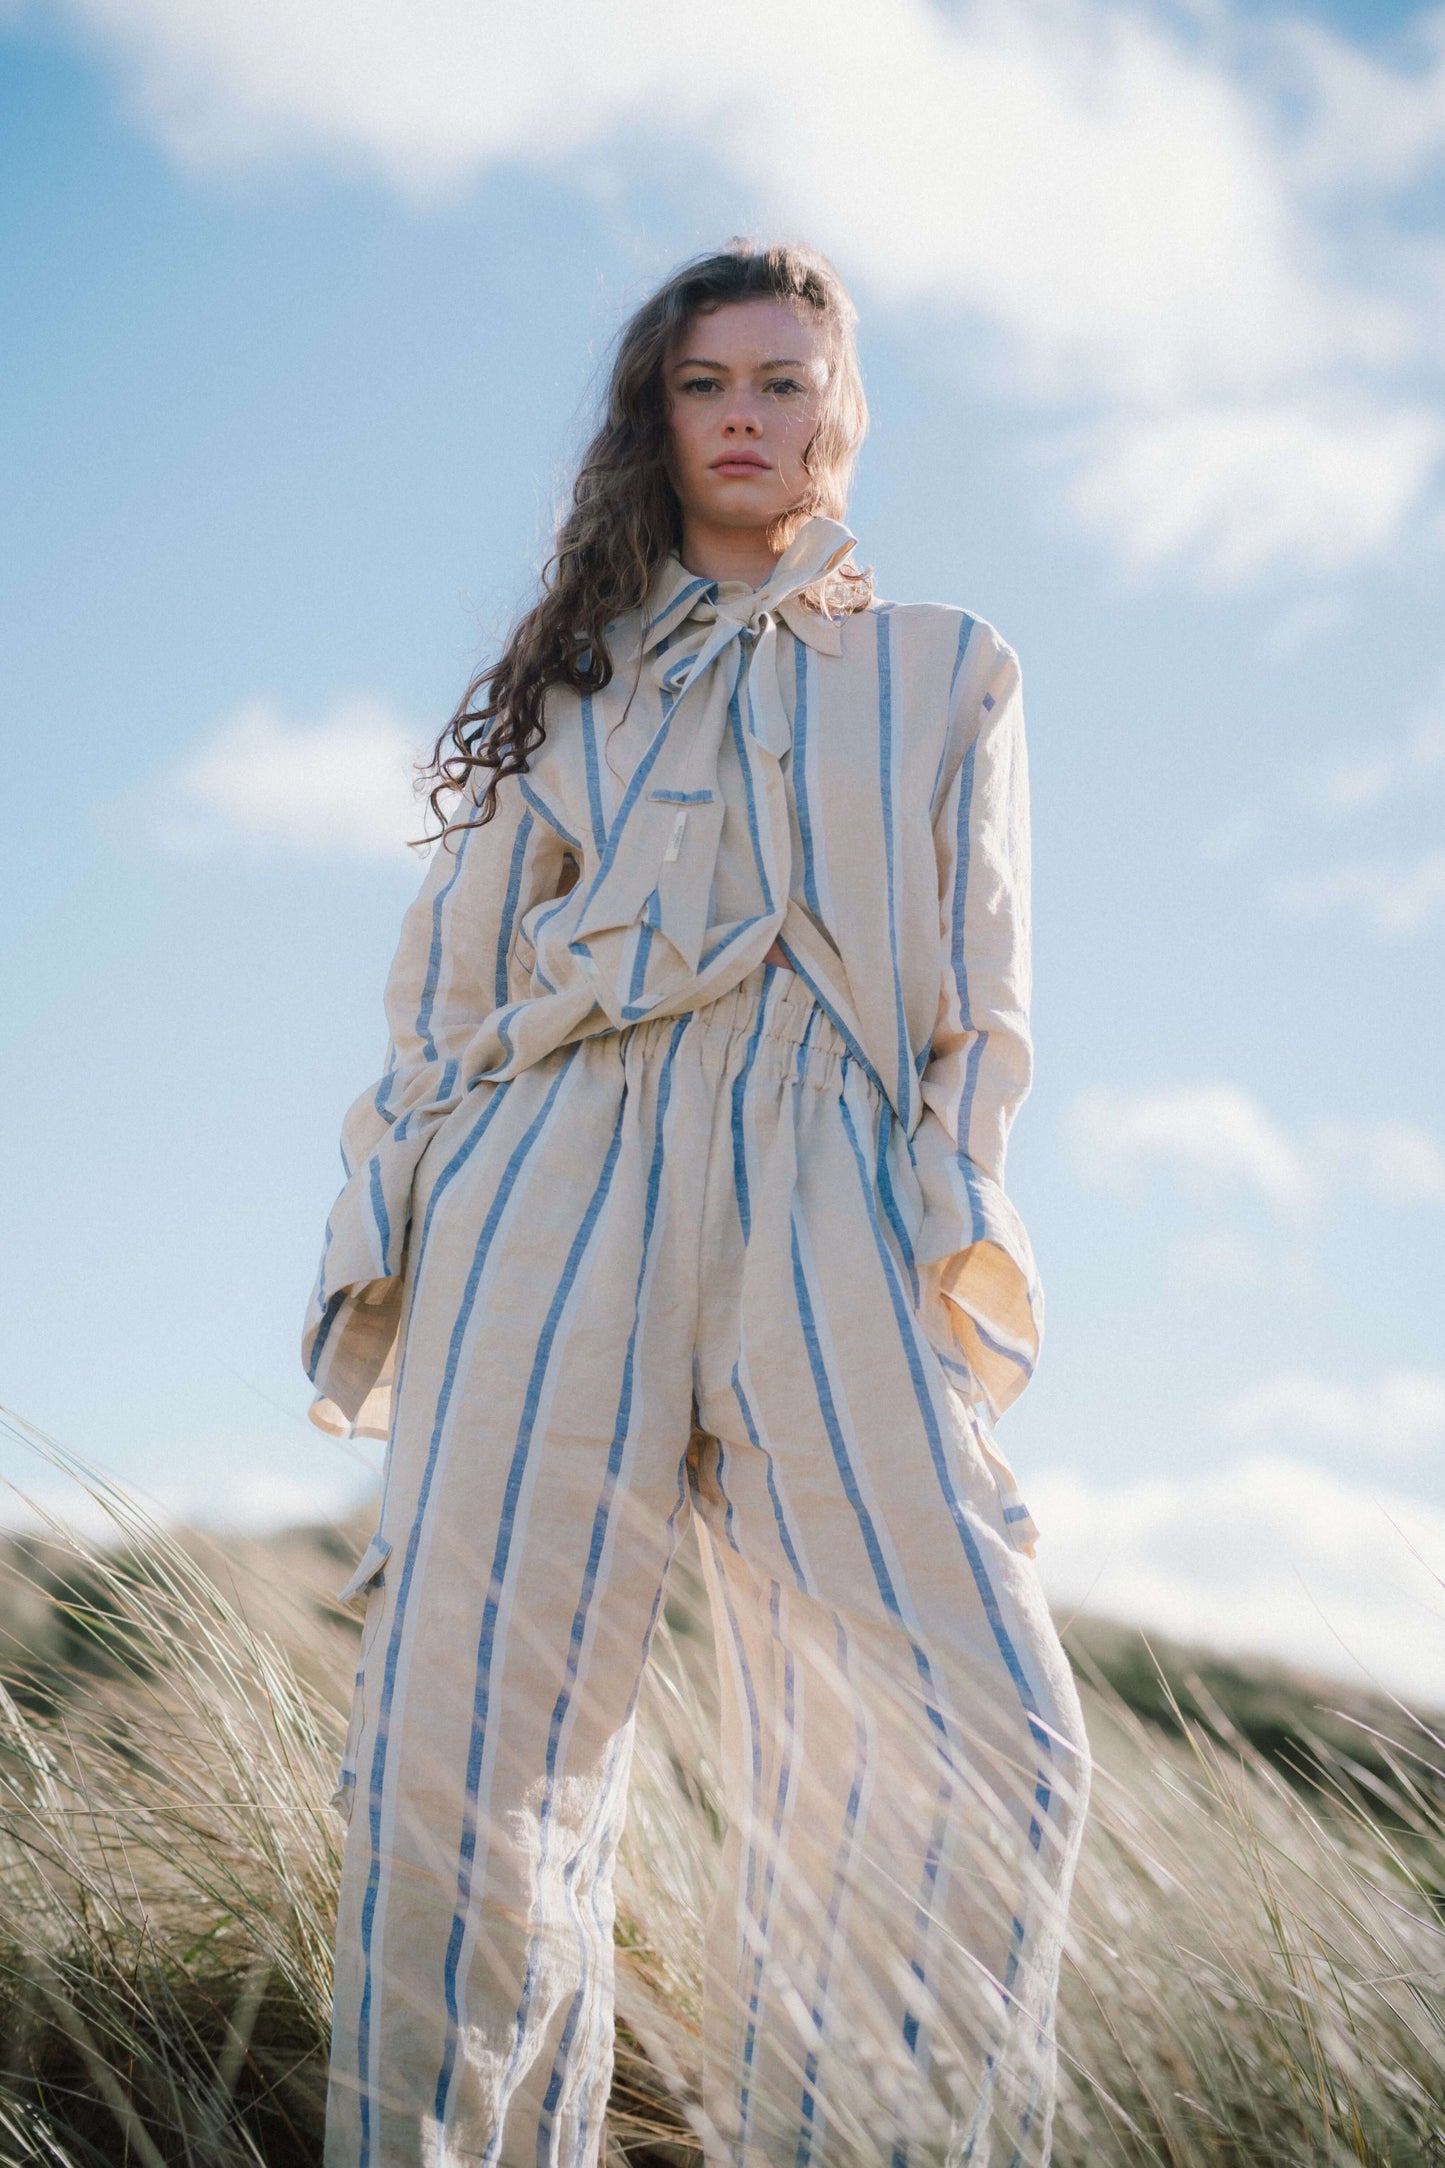 CARGO TROUSER - DUNE STRIPE | A design adapted from our much loved Nostalgia bottoms last Spring Summer - we have added asymmetric cargo pocket detail on each leg for a fun take on our Into The Wild inspiration this season. A double elasticated waistband